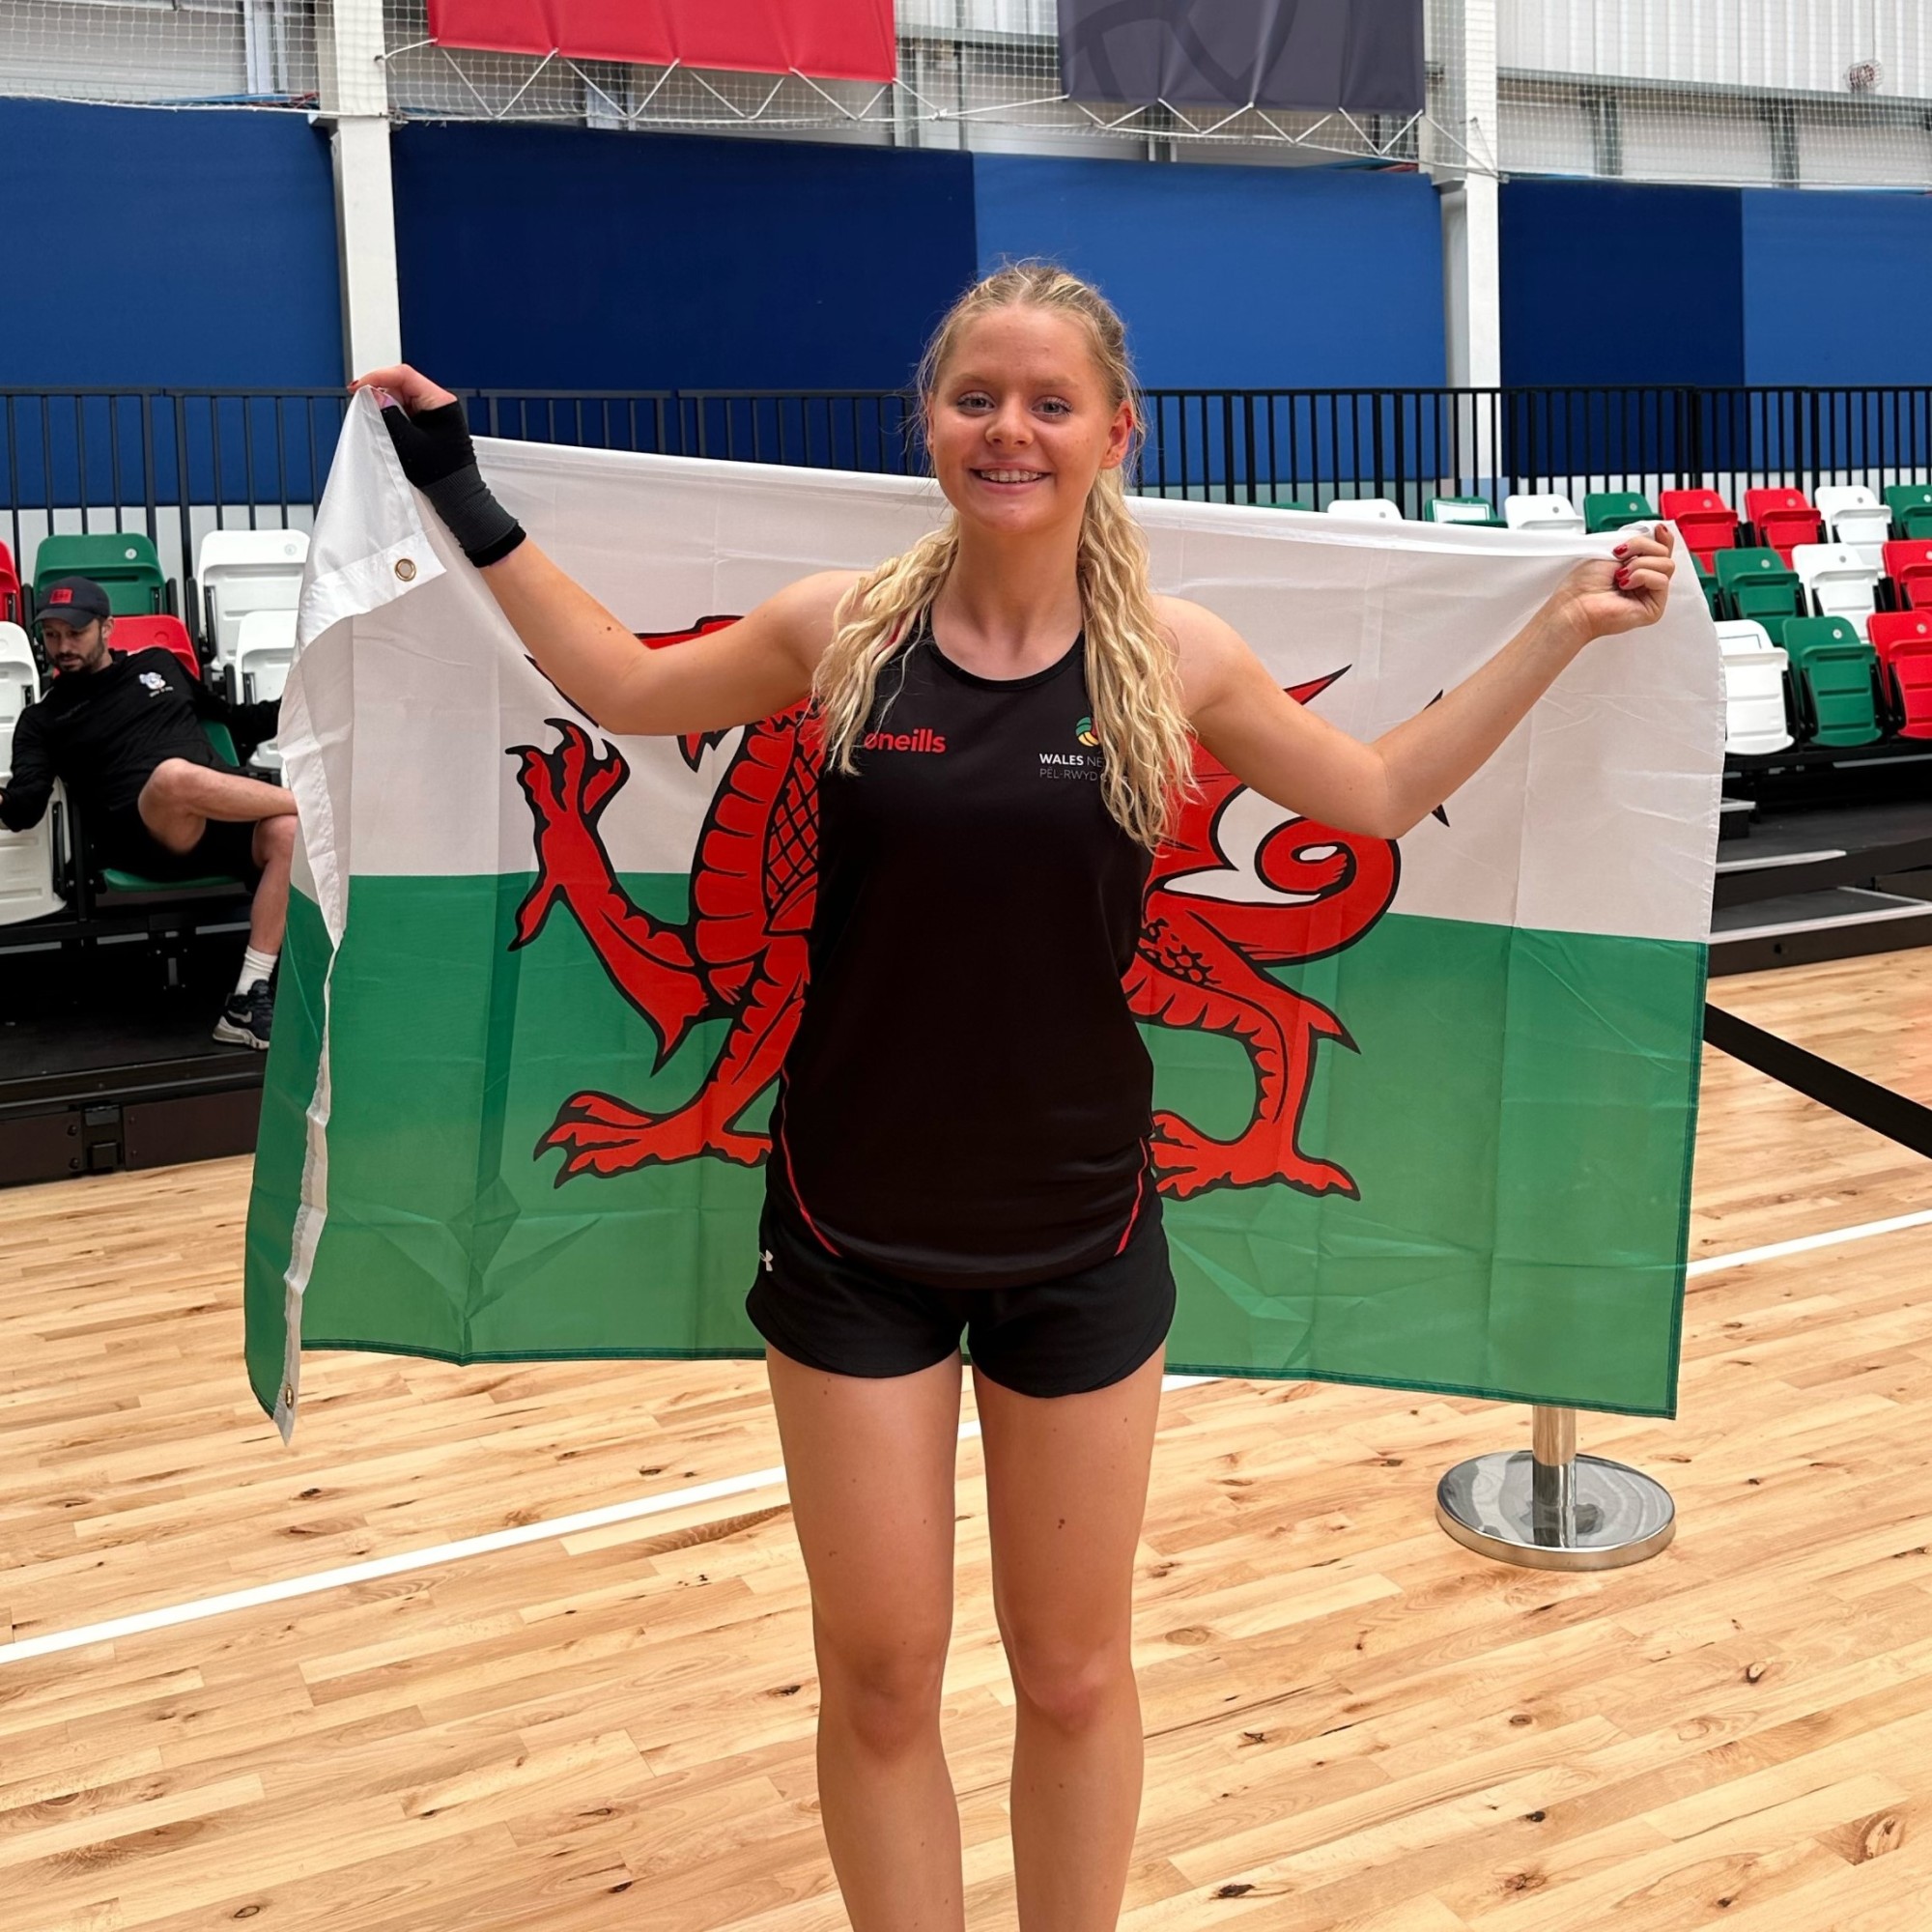 Hana holding a Welsh flag at House of Sport